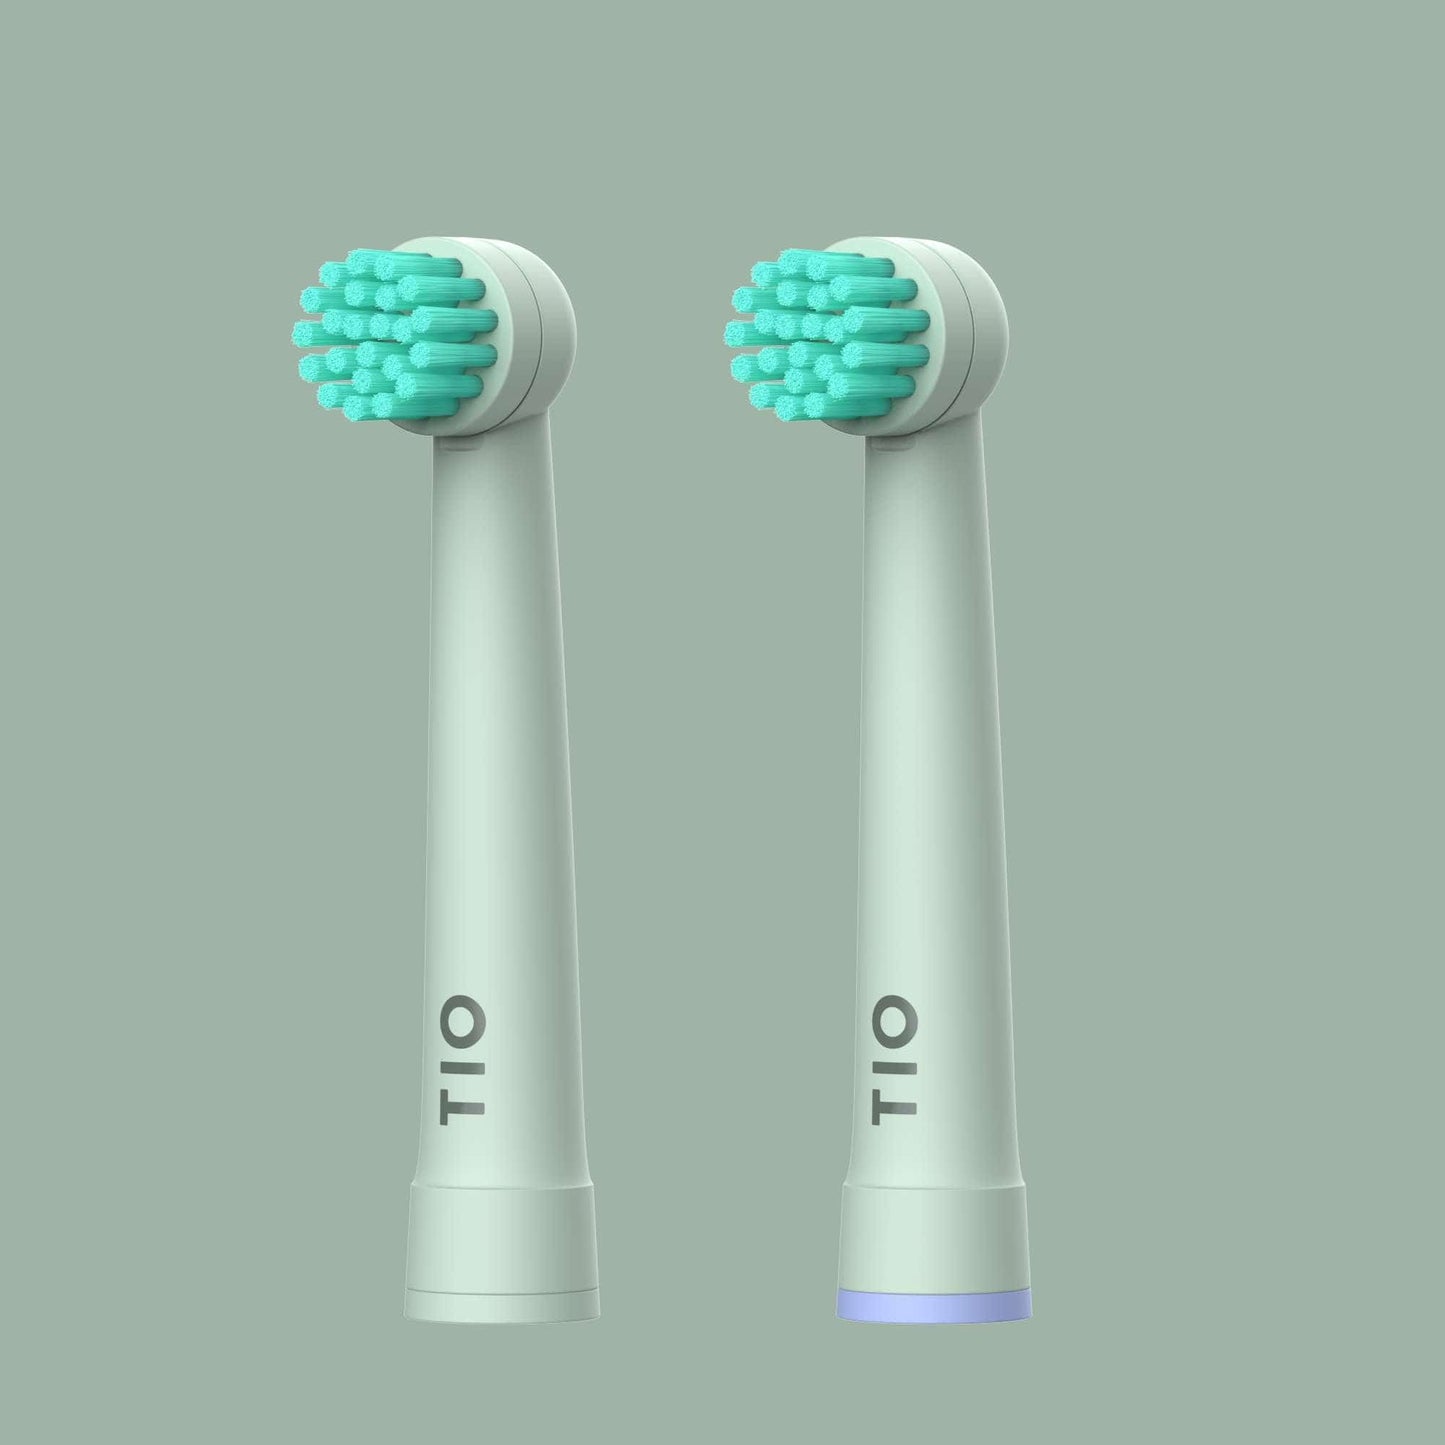 Tio Toothbrushes V02 - Lilac & Green Rings TIOMATIK Plant based replacement heads compatible with BRAUN Oral-B® electric toothbrushes